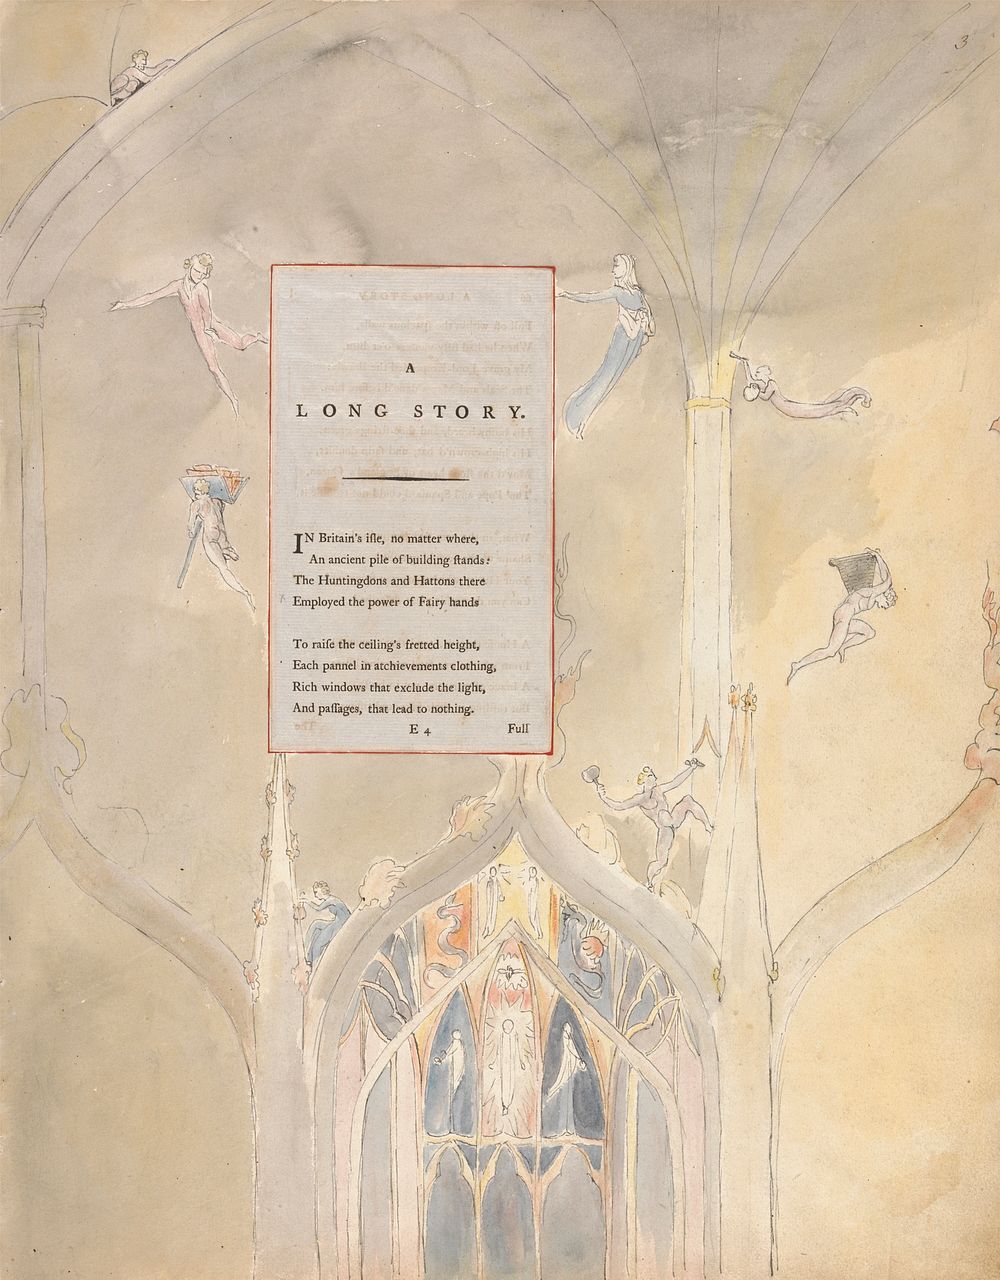 The Poems of Thomas Gray, Design 25, "A Long Story." by William Blake. Original public domain image from Yale Center for…